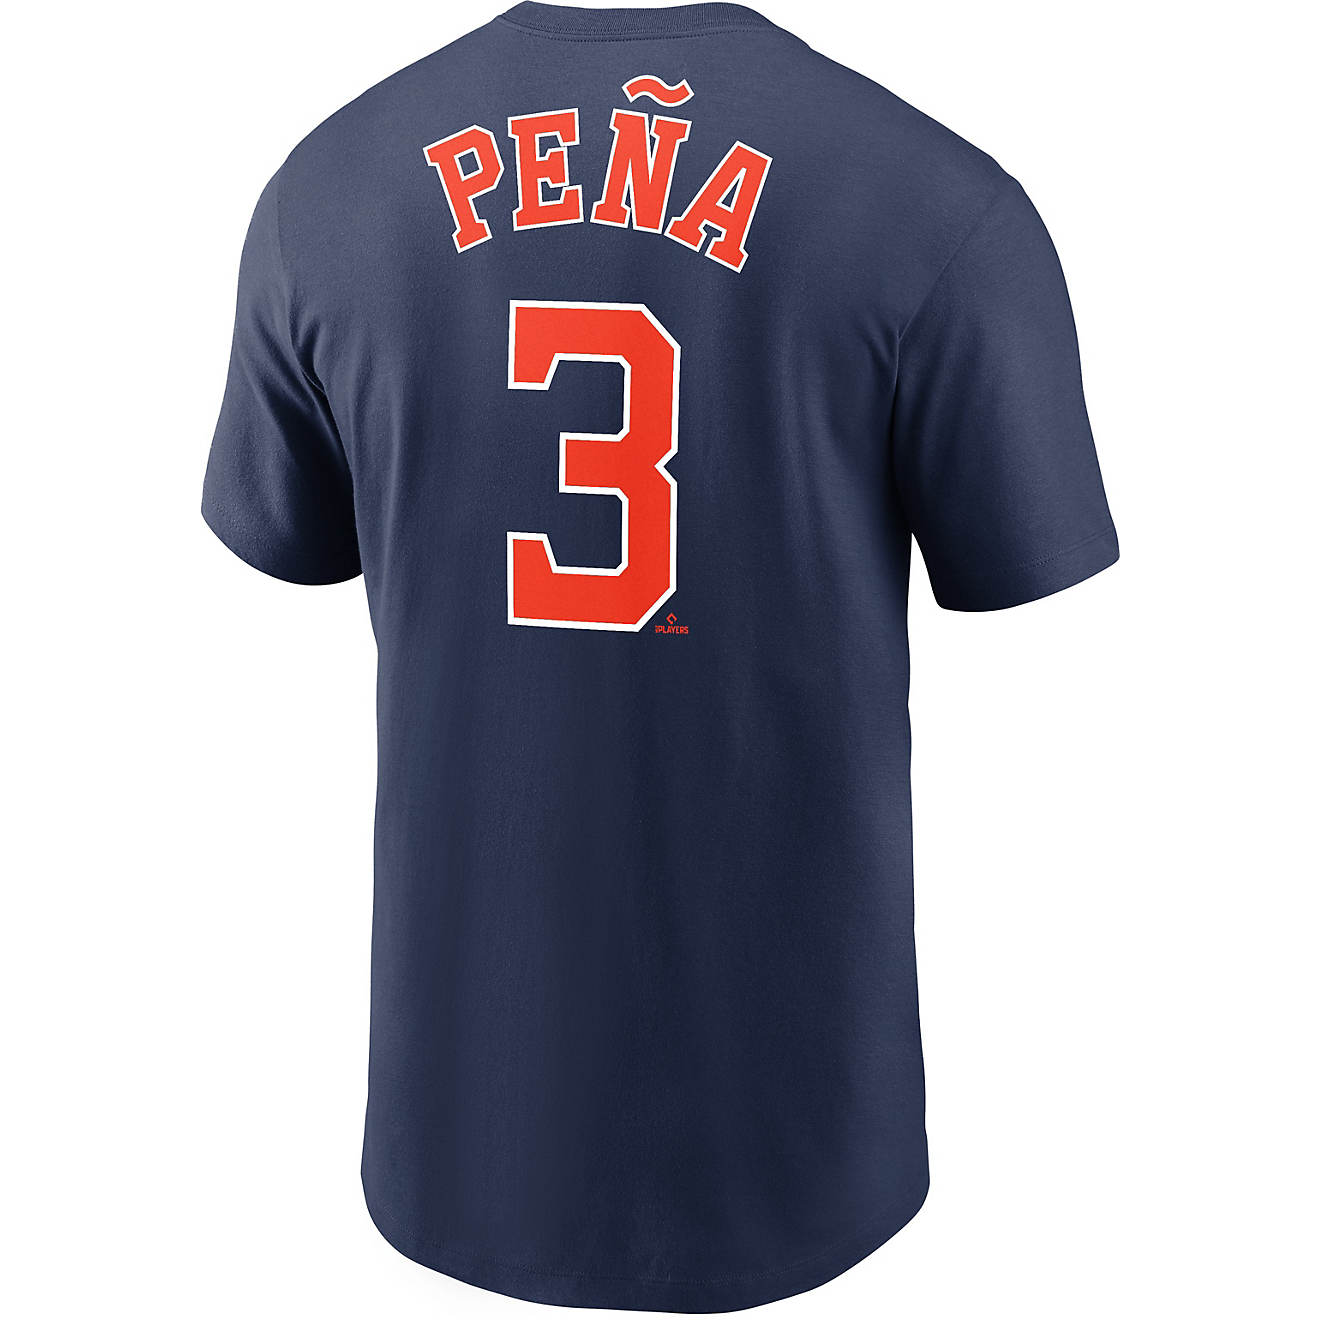 Nike Men’s Houston Astros Pena Name and Number Graphic T-shirt                                                                 - view number 1